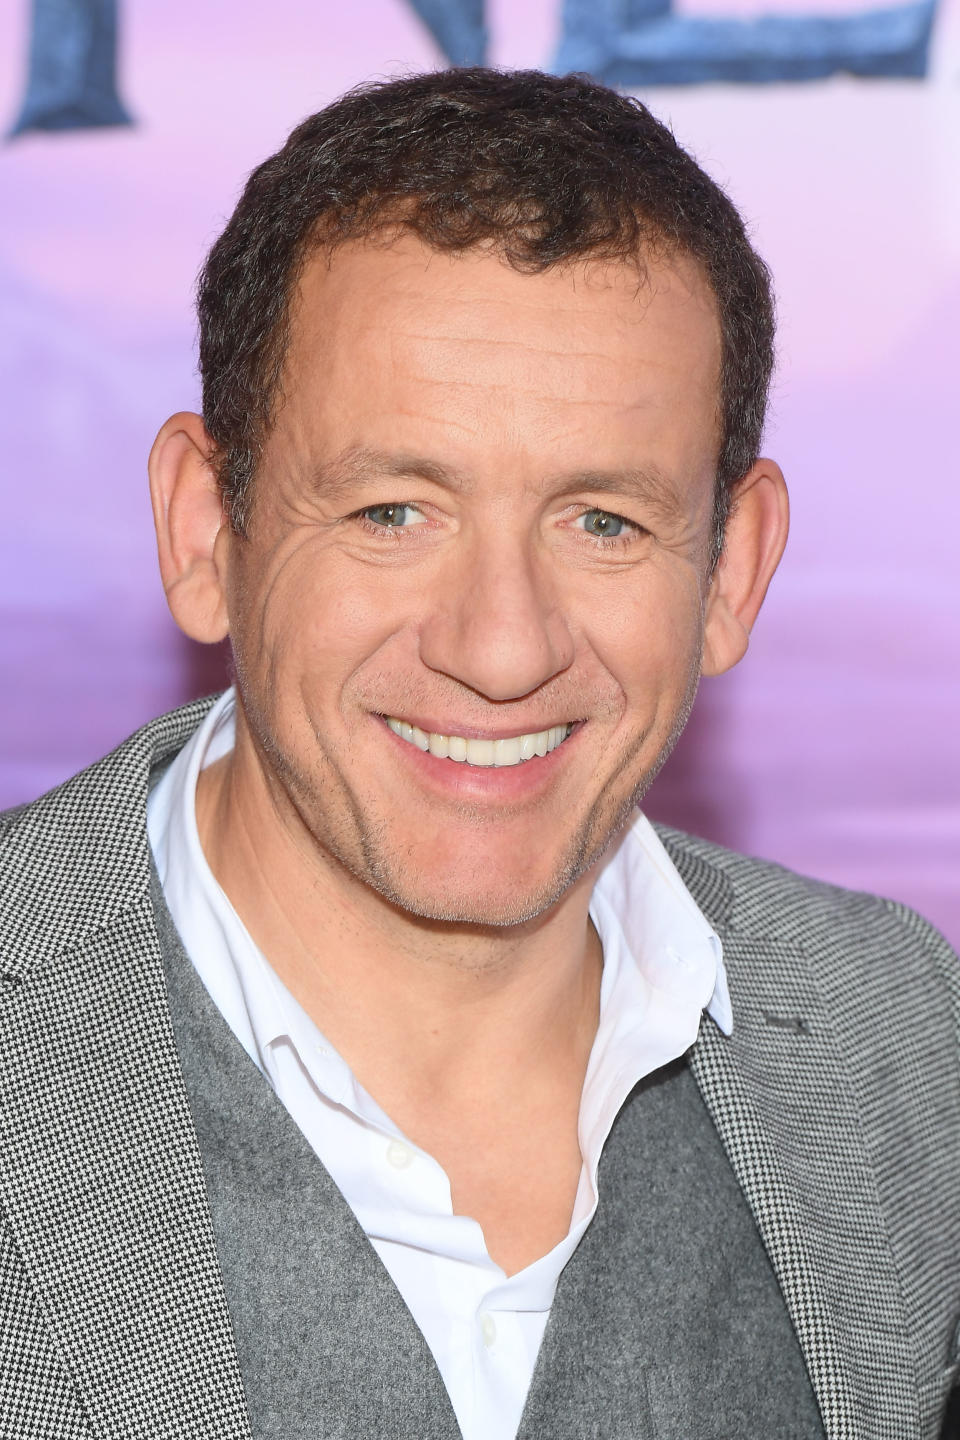 PARIS, FRANCE - NOVEMBER 13:  French voice of Olaf : Dany Boon attends "Frozen 2" Paris Gala Screening at Cinema Le Grand Rex on November 13, 2019 in Paris, France. (Photo by Stephane Cardinale - Corbis/Corbis via Getty Images)